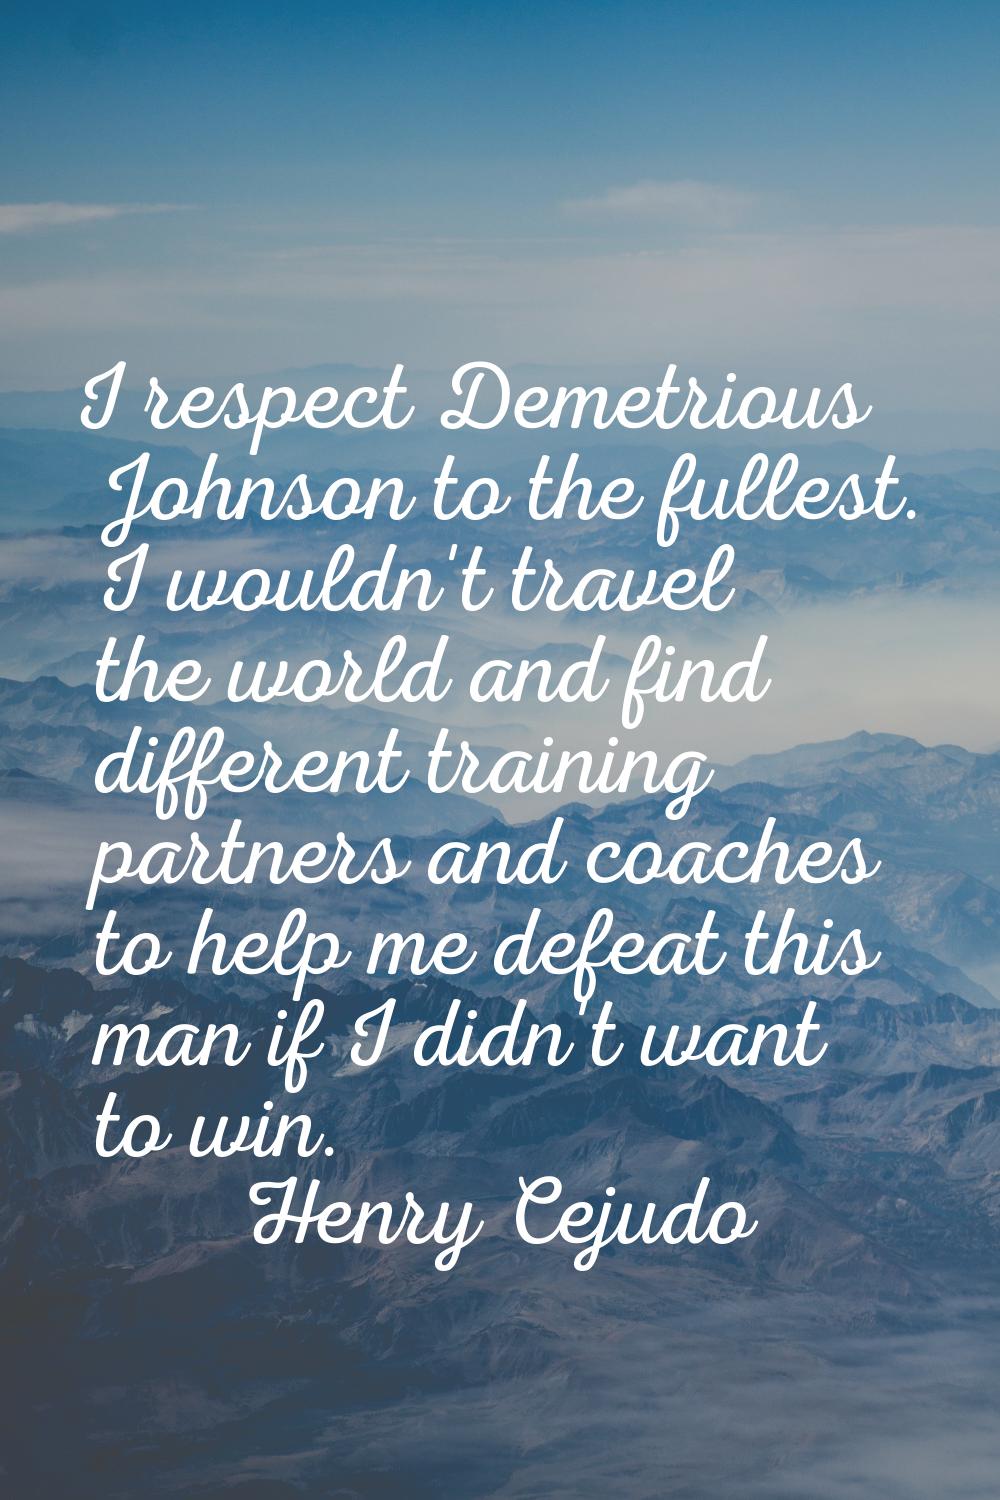 I respect Demetrious Johnson to the fullest. I wouldn't travel the world and find different trainin